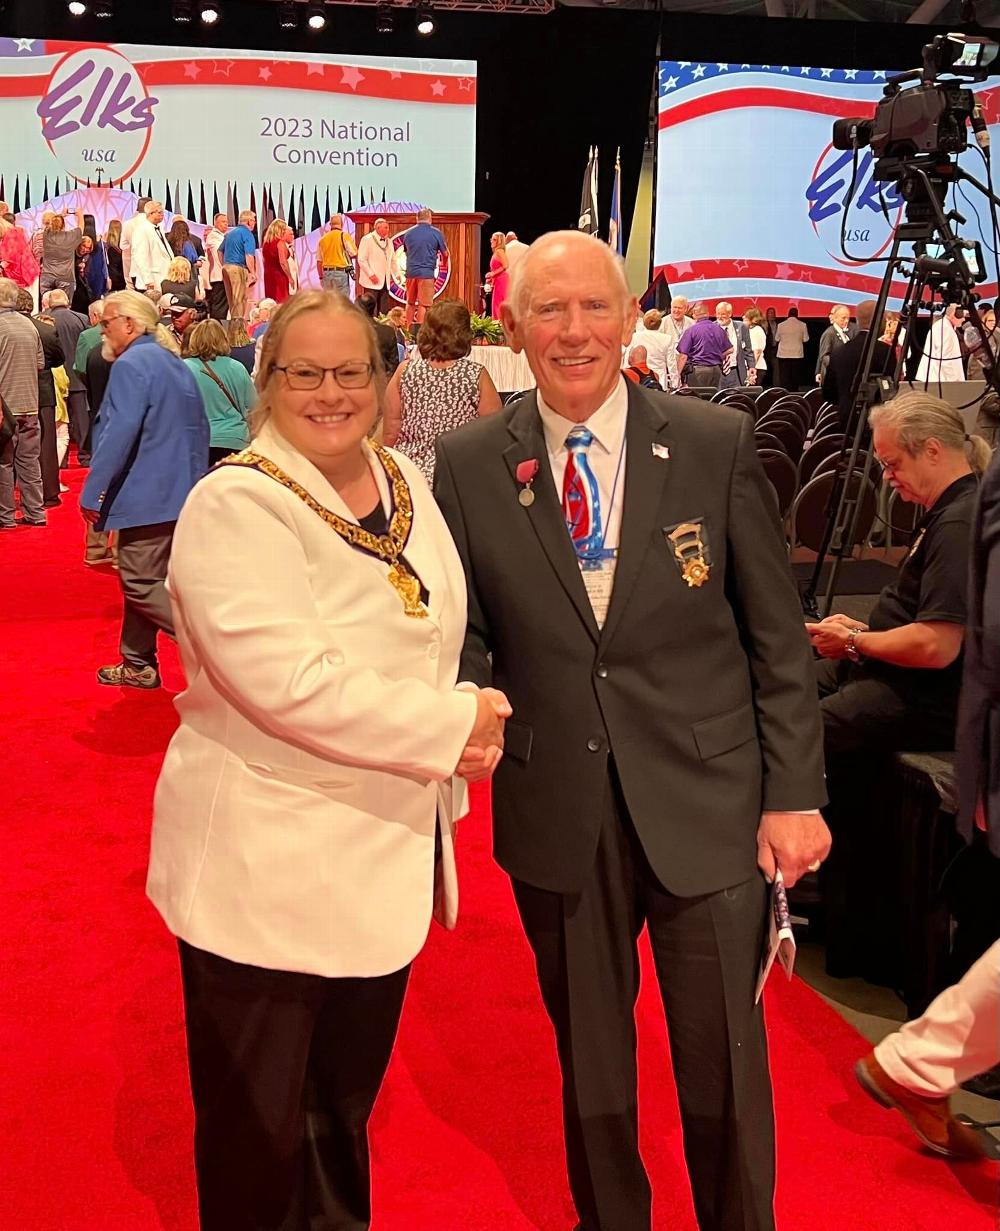 District Deputy G.E.R.Sheri McCord being congratulated by Texas Sponsor, Honorable John Amen on July 5, 2023 at the Grand Lodge Convention